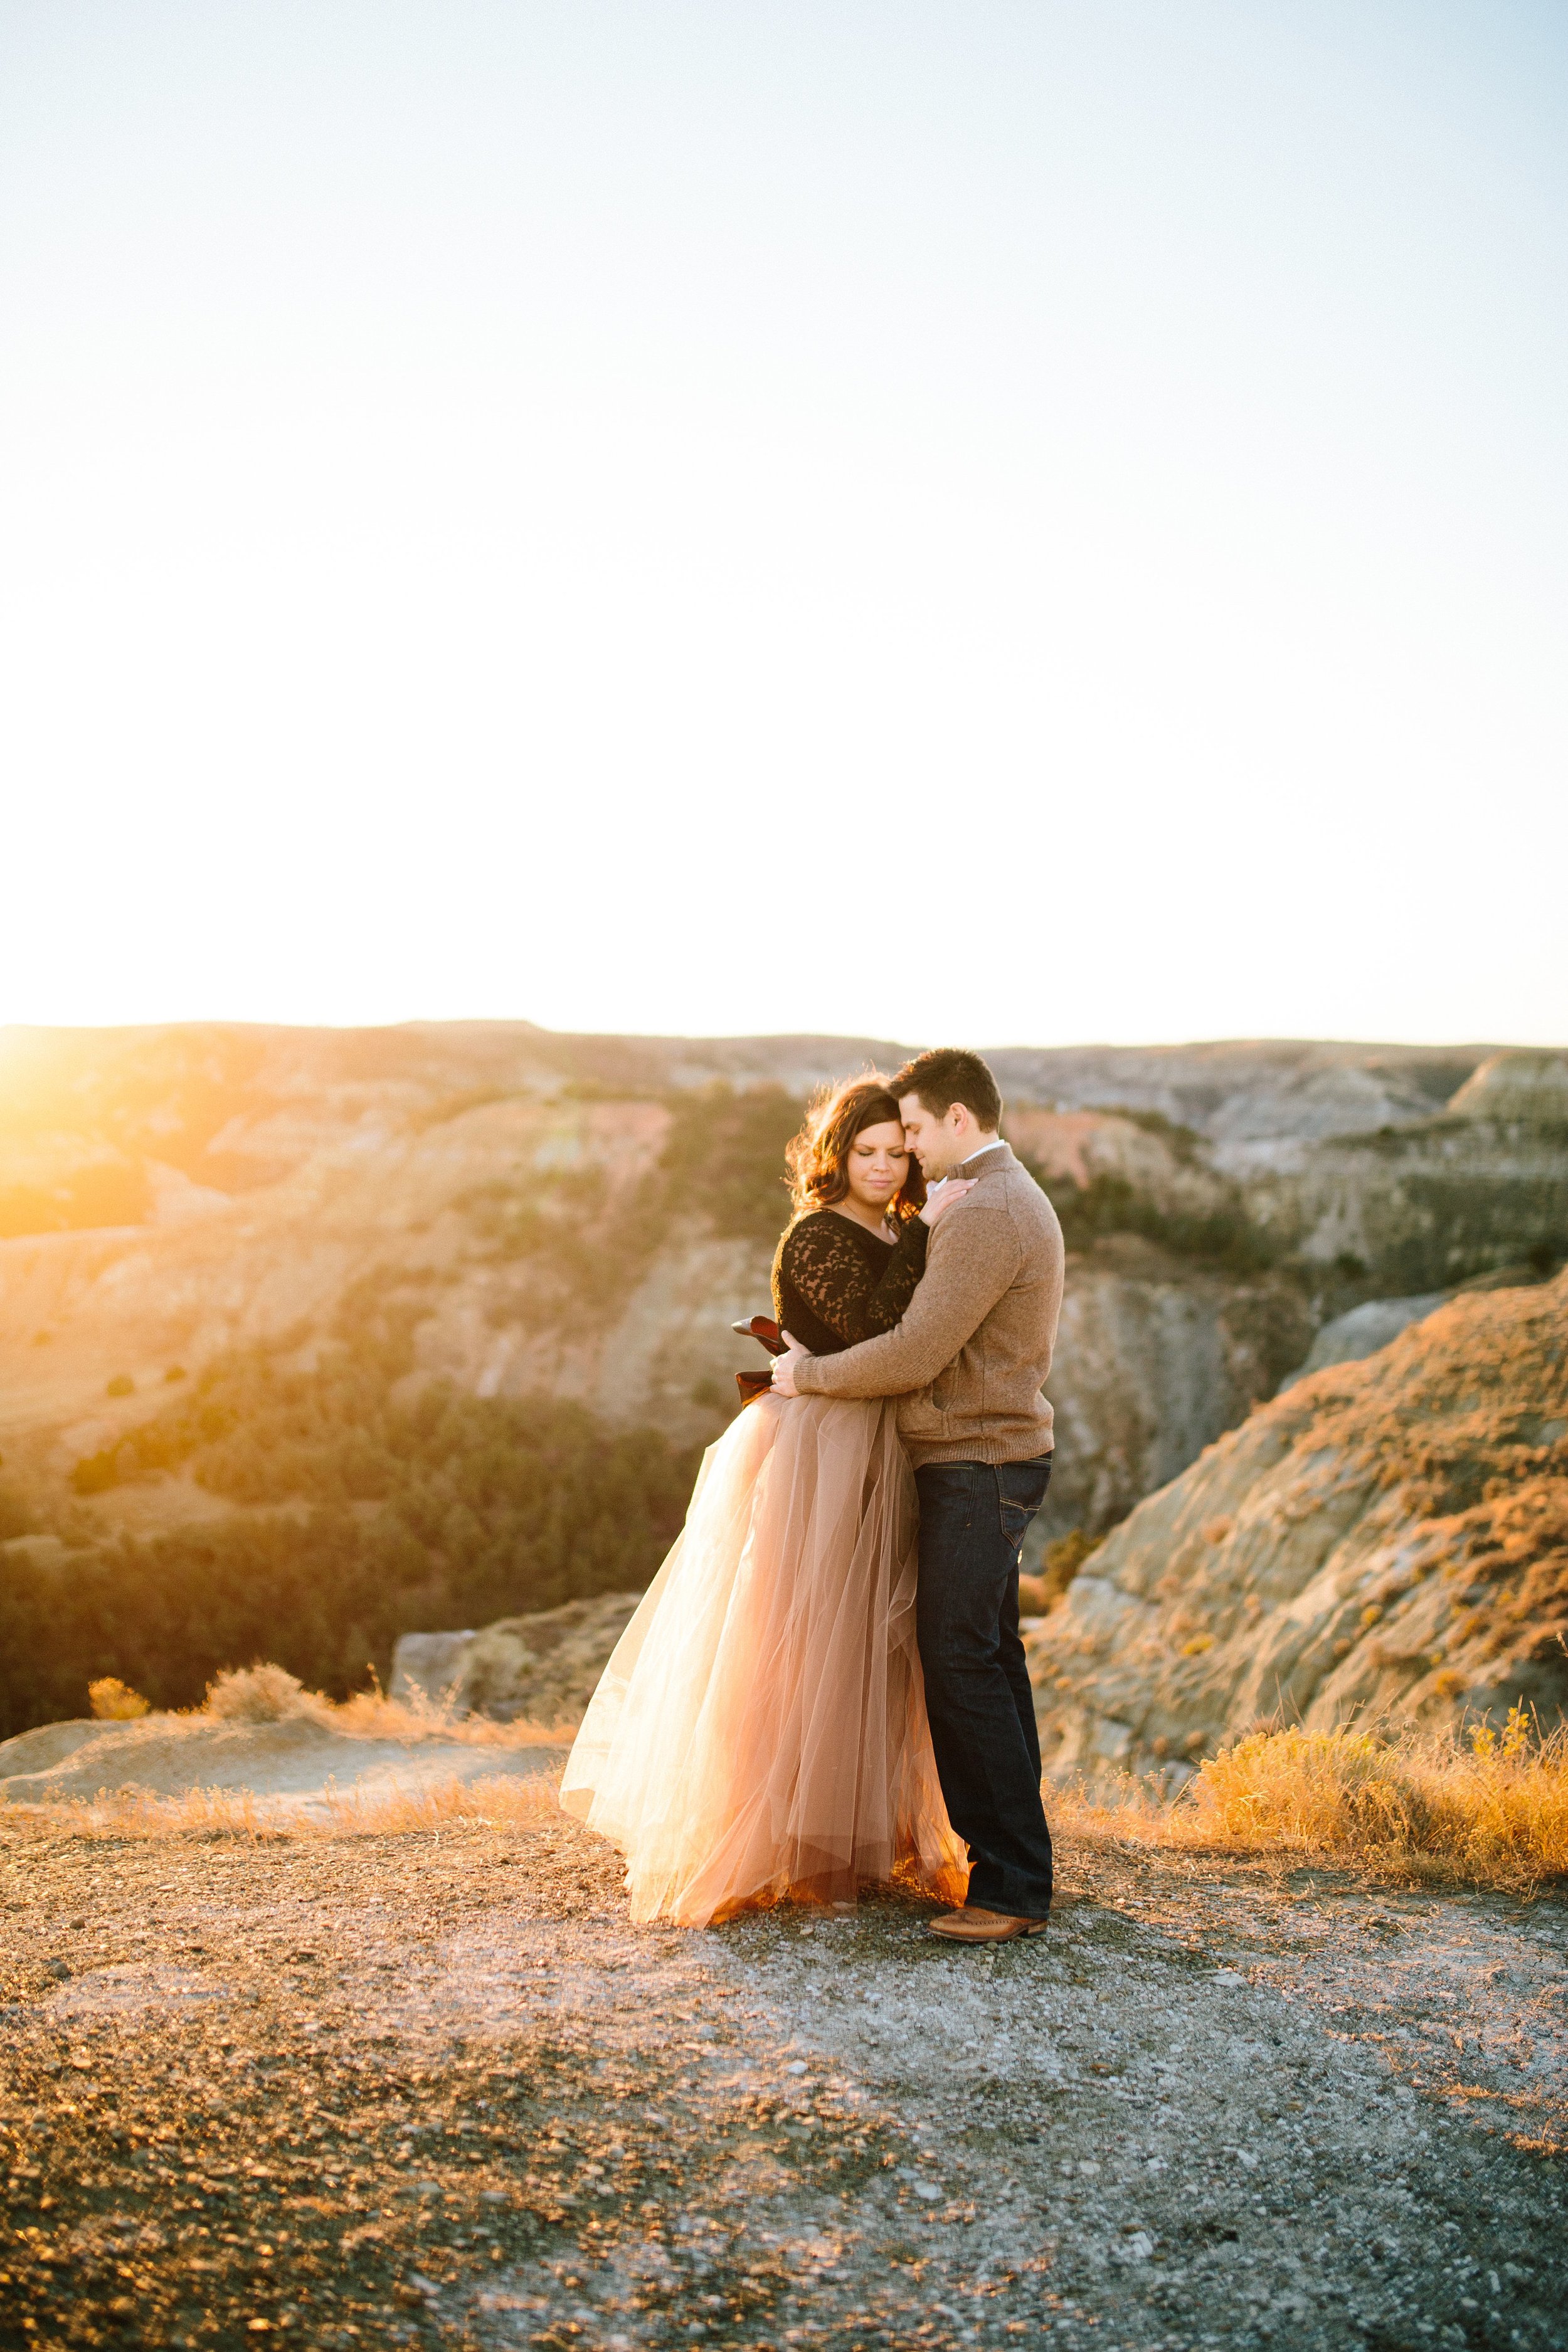 Romantic Sunset Couples Session at the Theodore Roosevelt National Park in North Dakota by Seattle WA destination photographer Janelle Elaine Photography.jpg